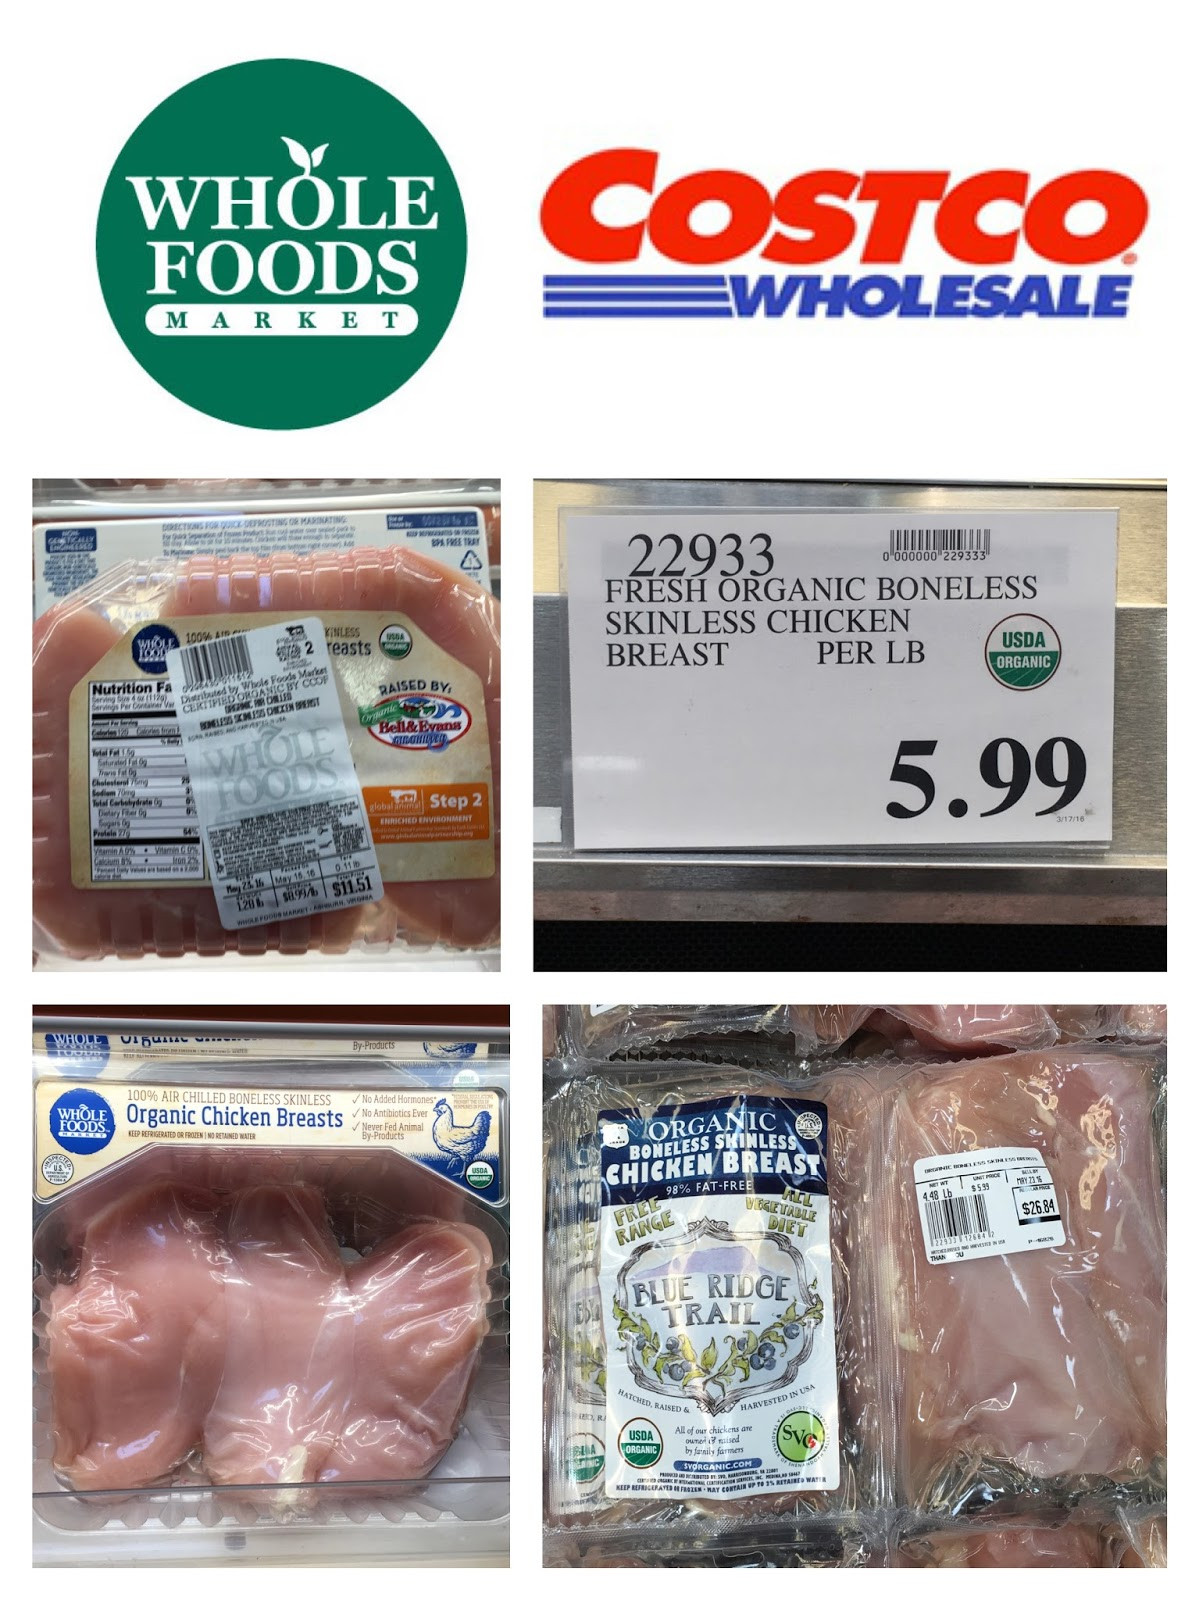 Whole Foods Organic Chicken
 the Costco Connoisseur Costco vs Whole Foods and Tar